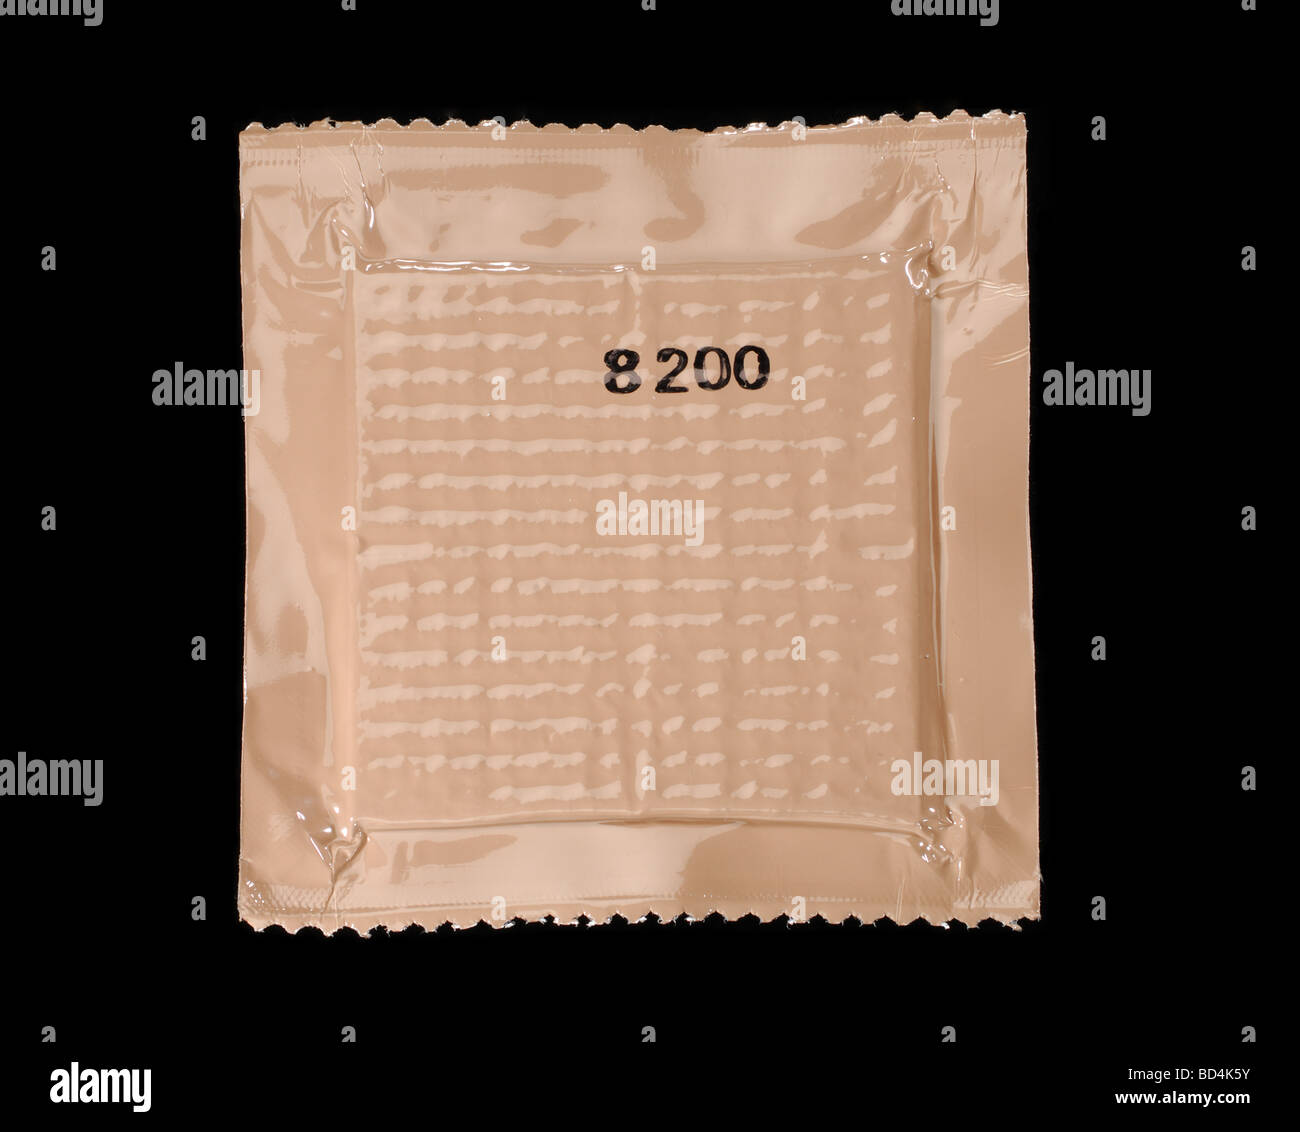 Brown plastic container of Military food rations Stock Photo